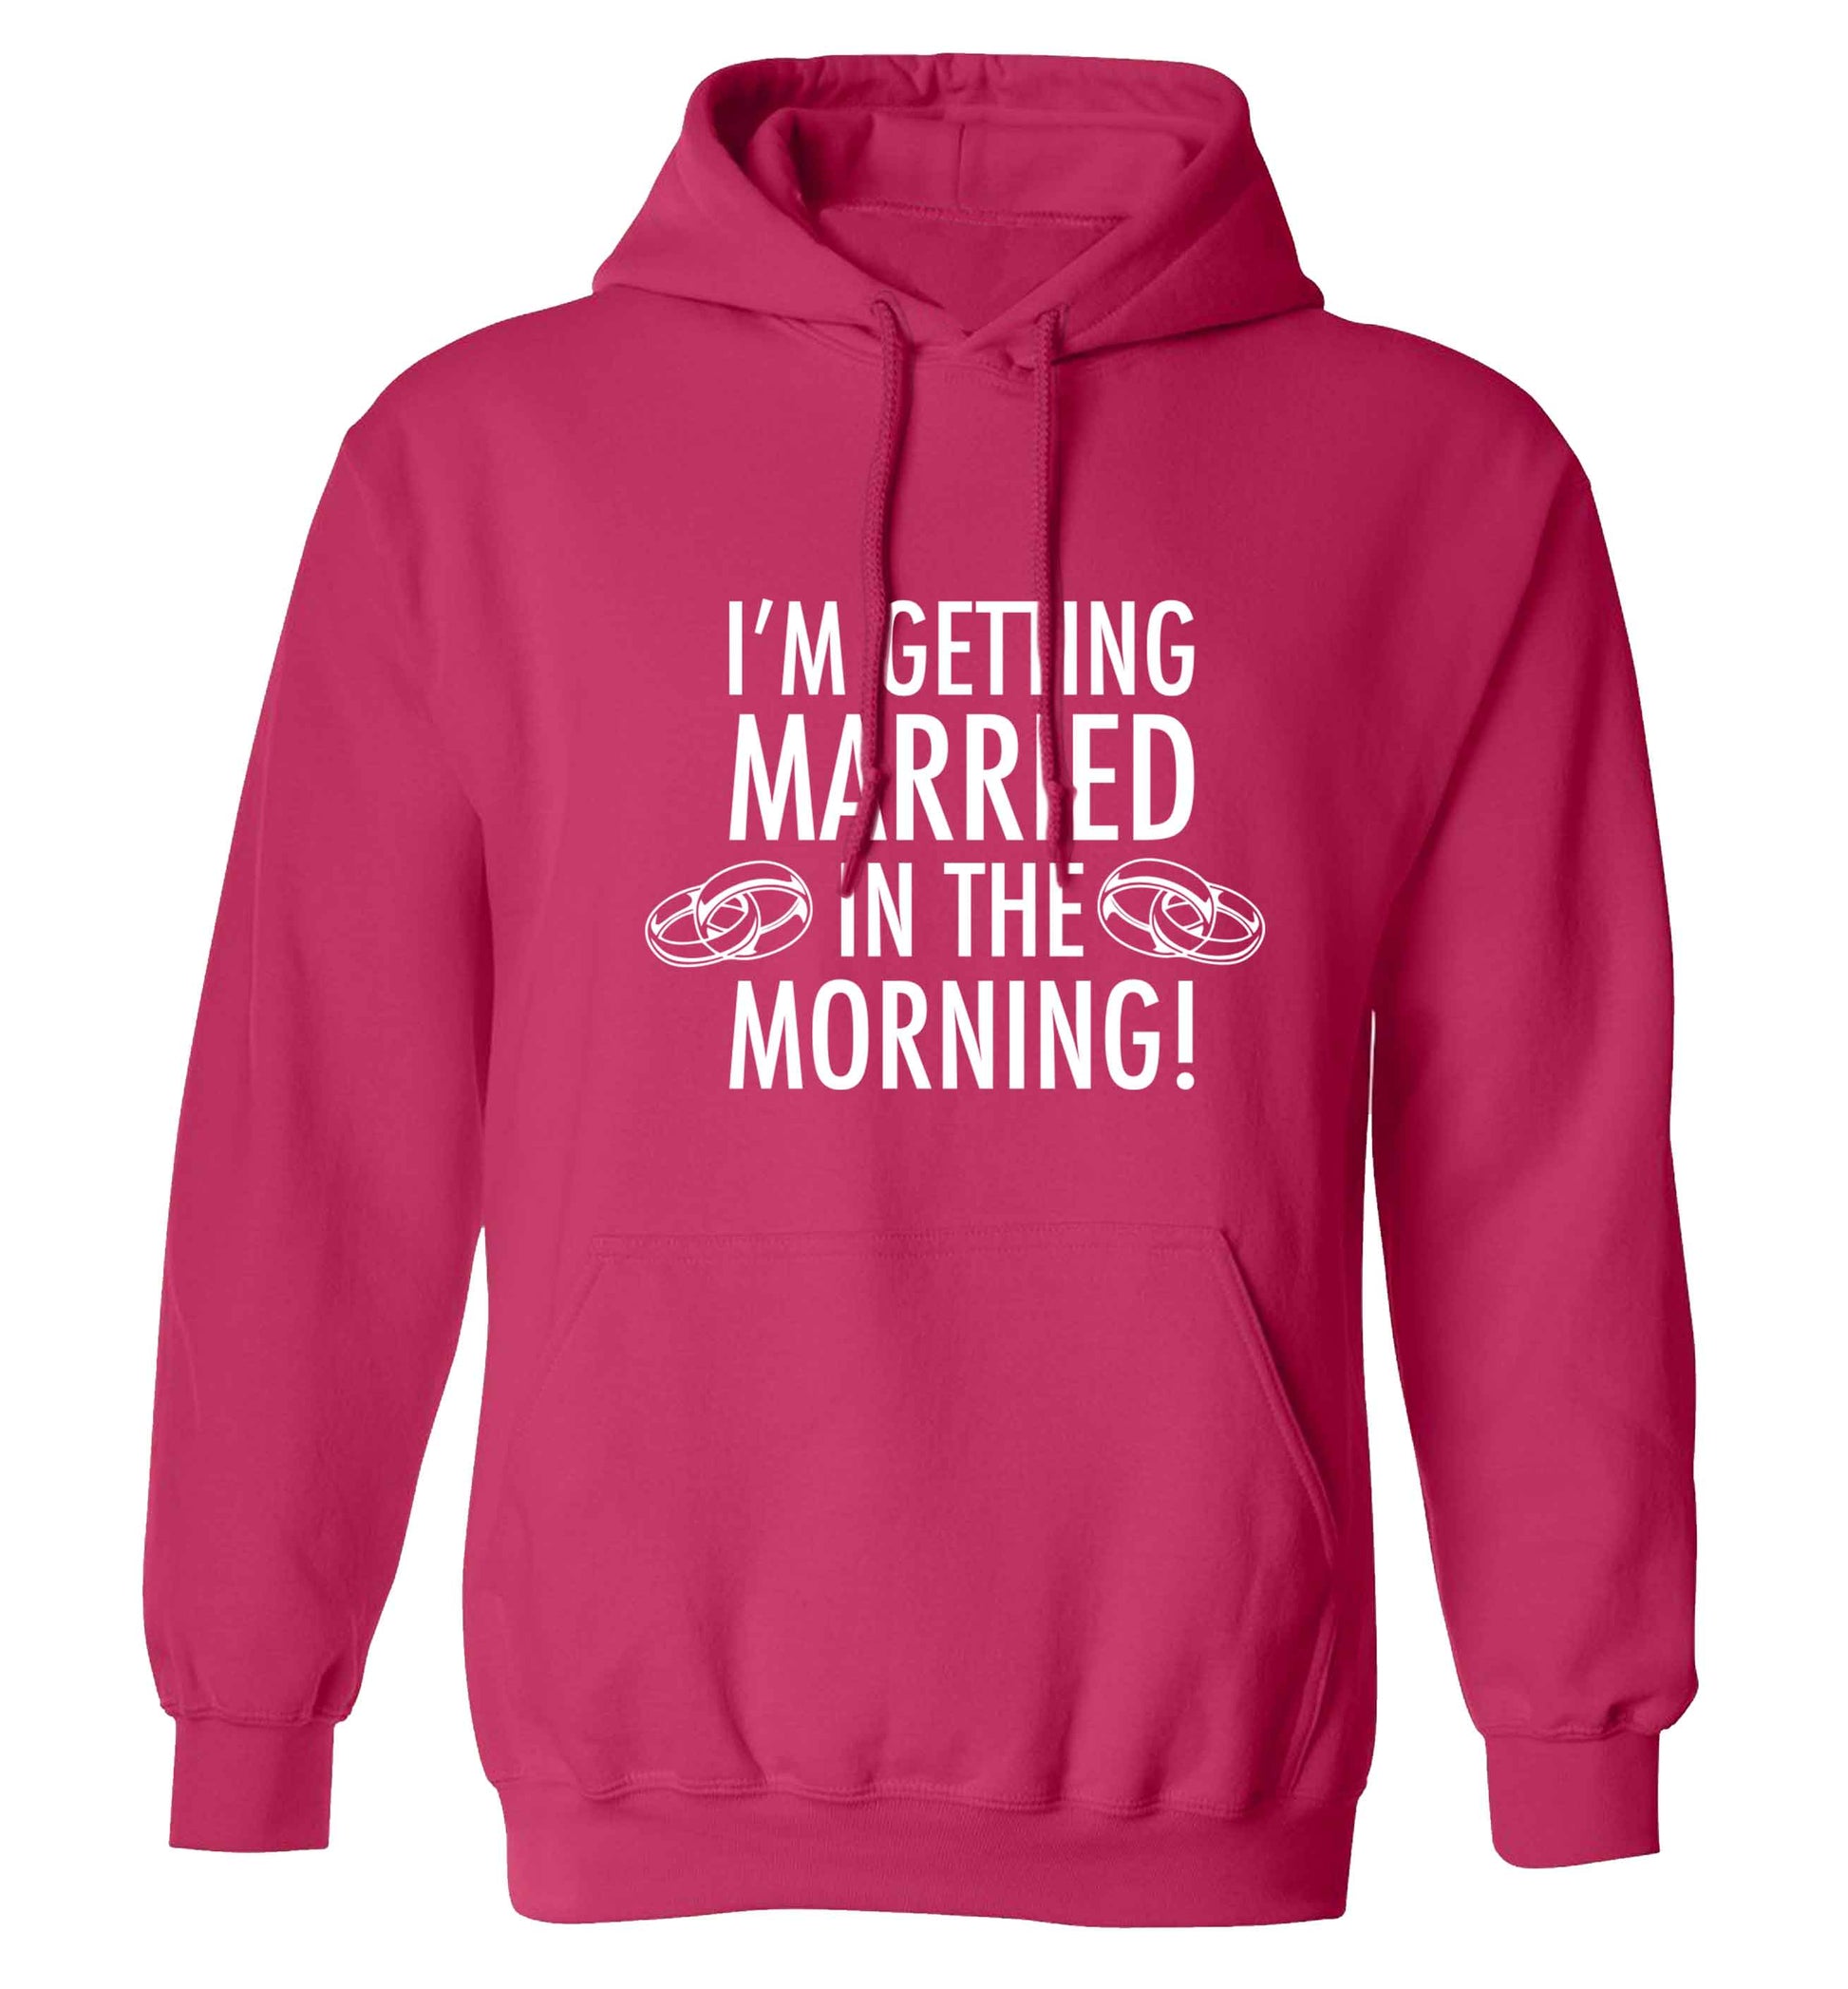 I'm getting married in the morning! adults unisex pink hoodie 2XL